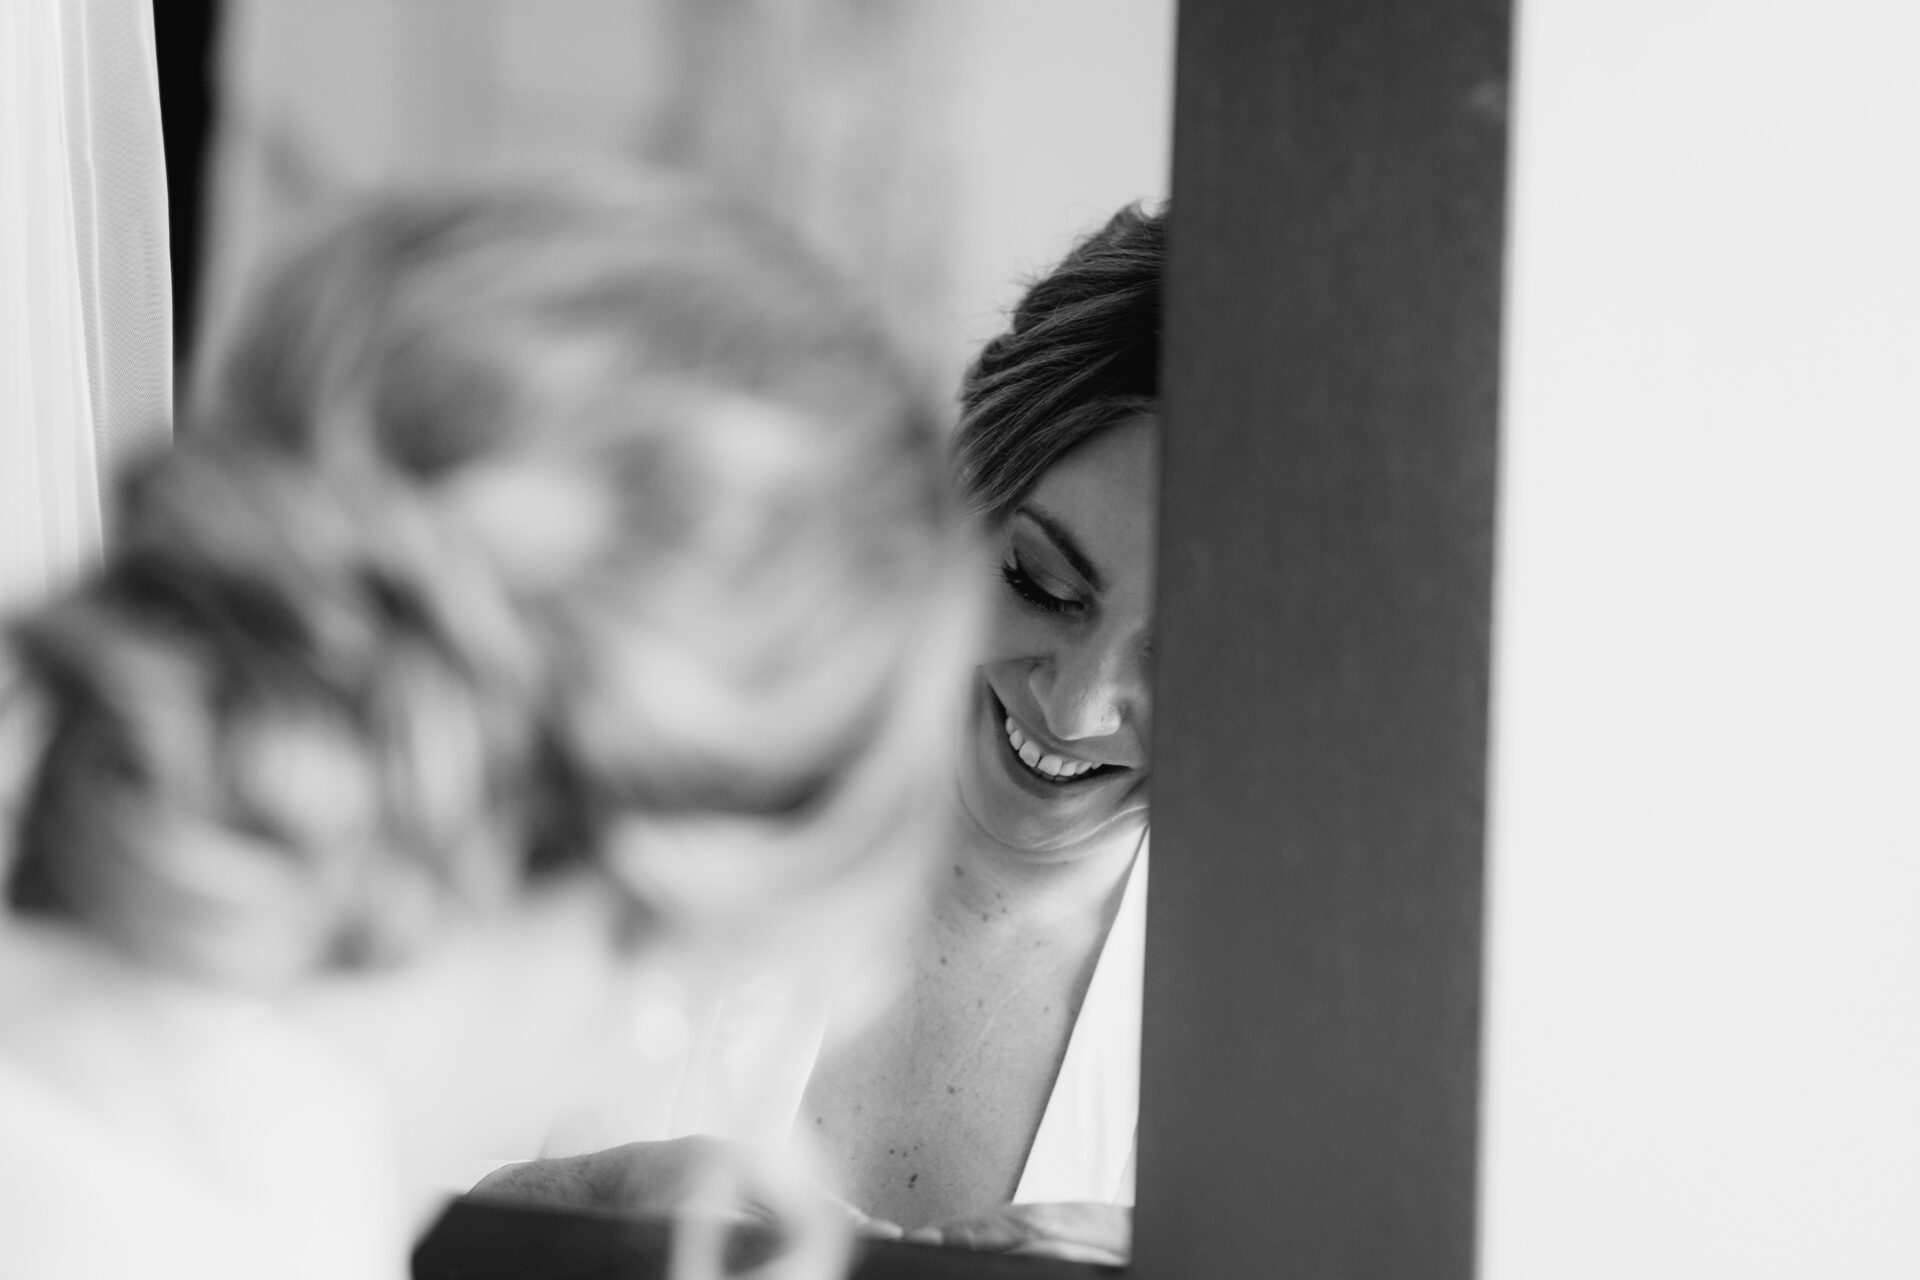 The bride gets ready before her church wedding ceremony in Oxfordshire